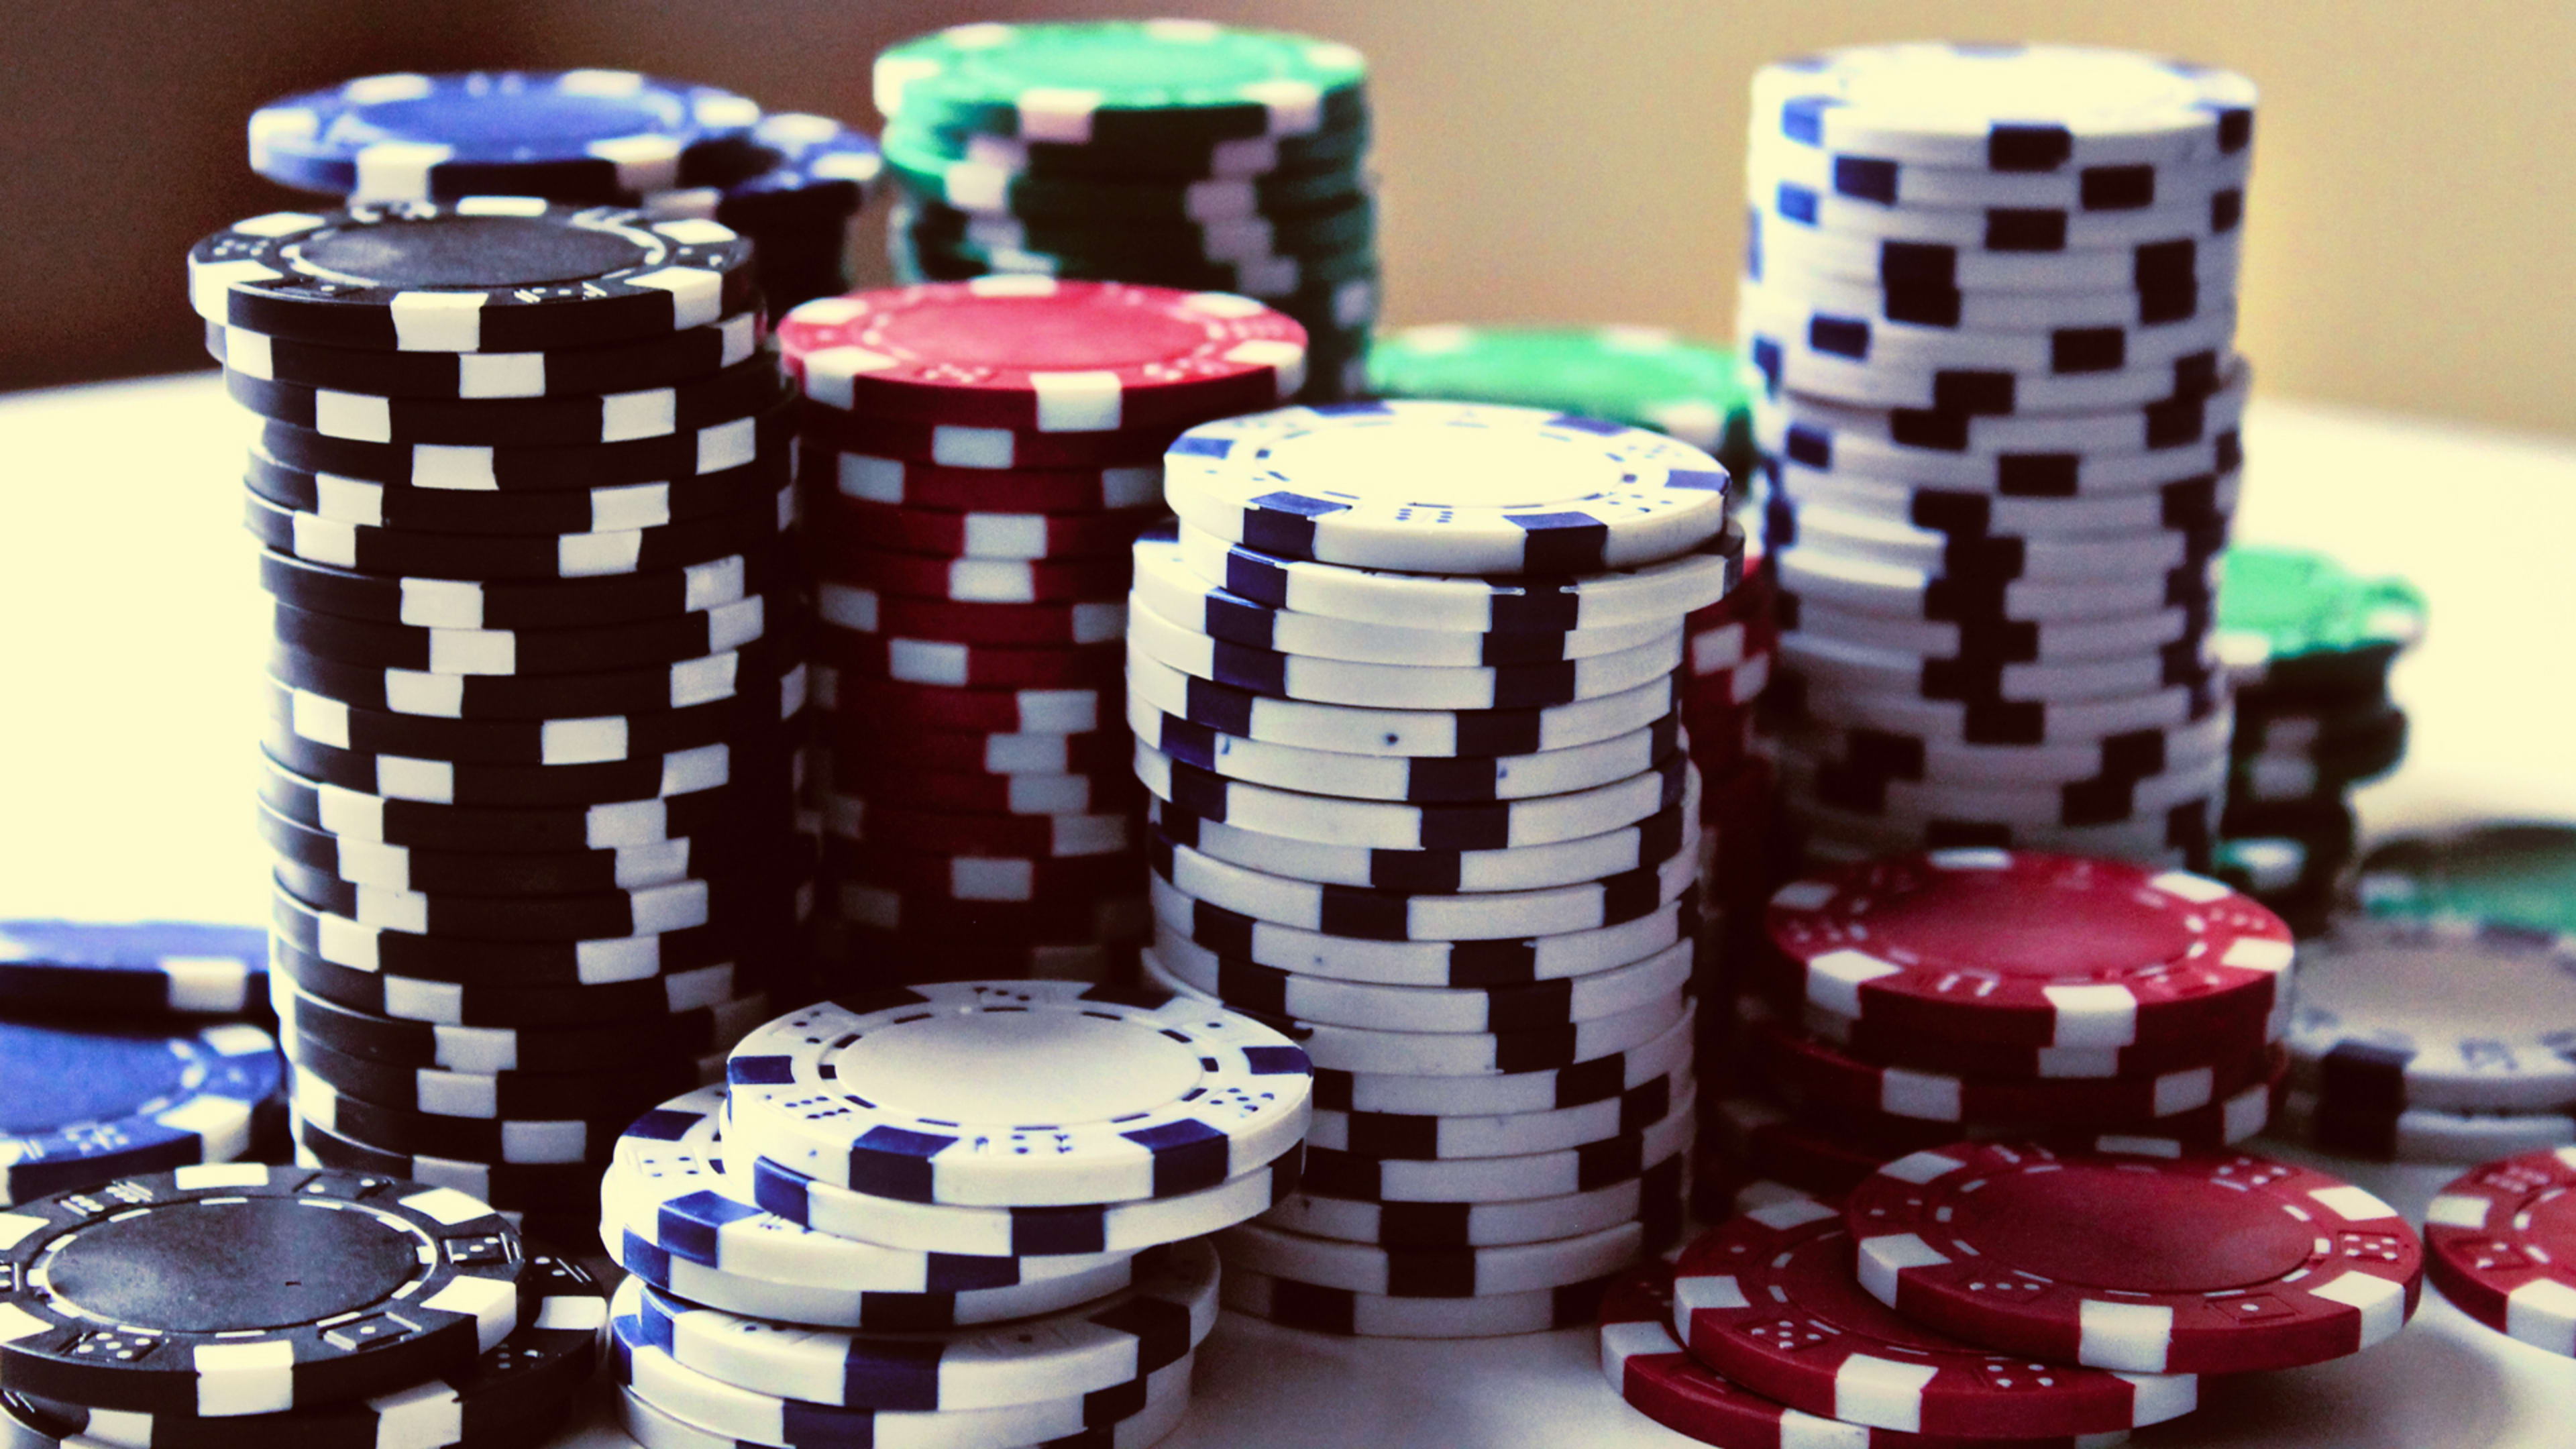 In a win for casinos, a new DOJ opinion makes all online gambling illegal